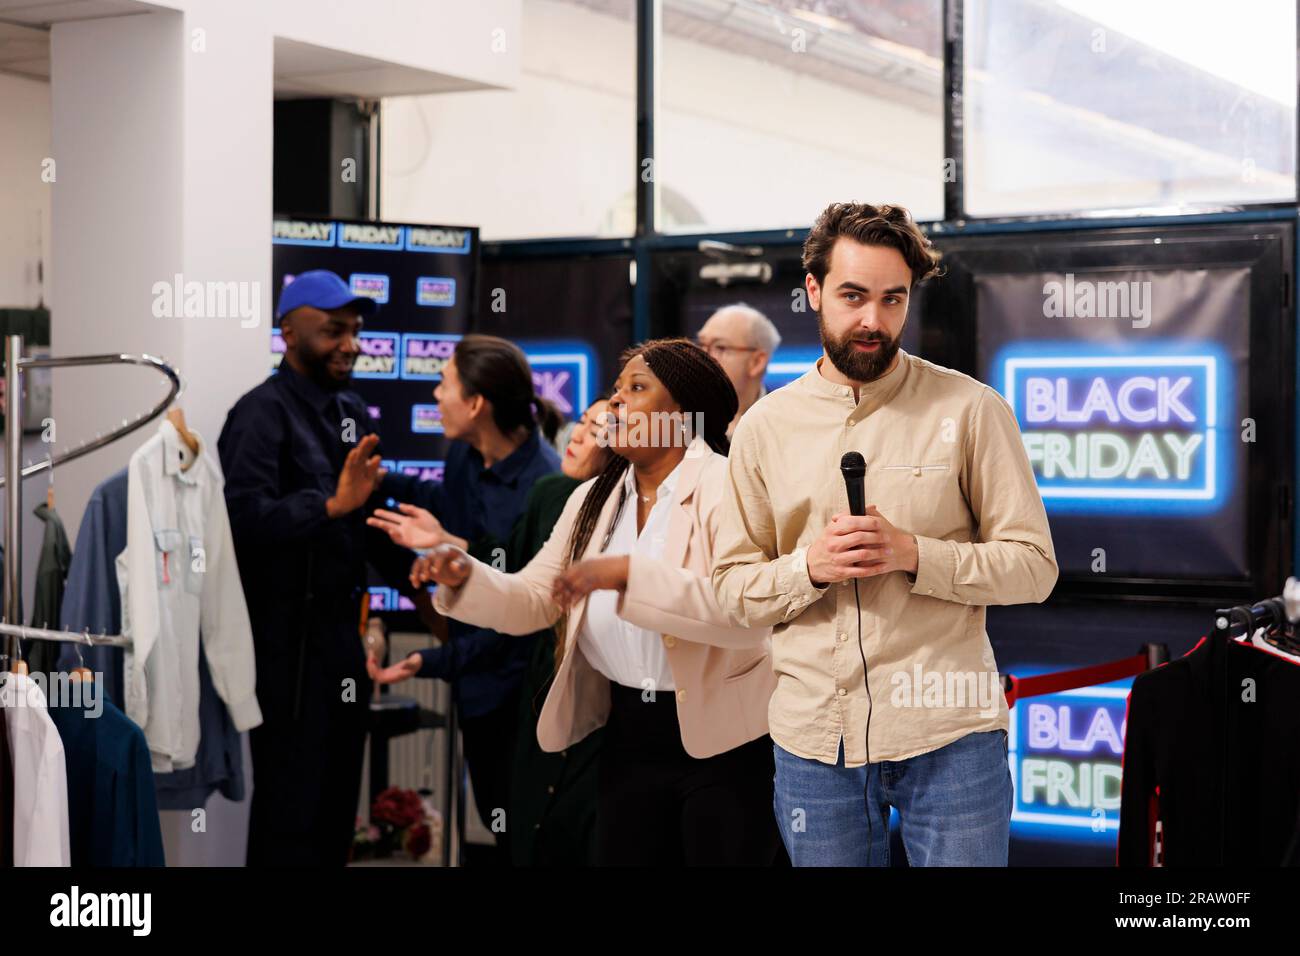 Excited happy crowd of shoppers rushing into clothing store to get best deals. Crazy frenzy diverse people running into shopping mall during Black Friday sales, hunting for bargains Stock Photo